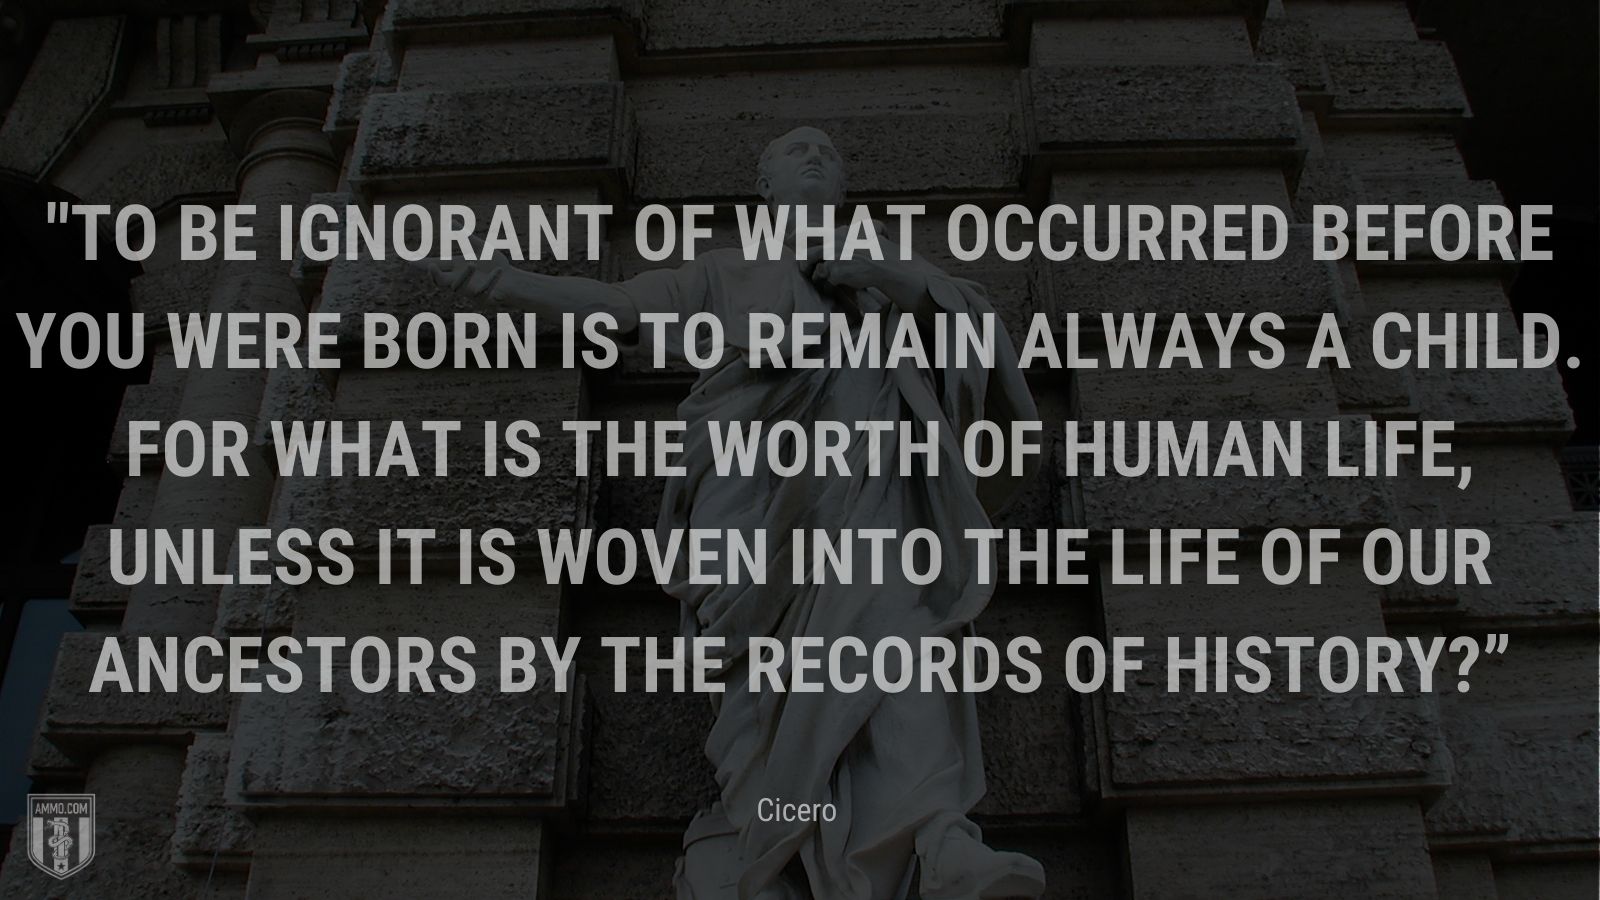 “To be ignorant of what occurred before you were born is to remain always a child. For what is the worth of human life, unless it is woven into the life of our ancestors by the records of history?” - Cicero